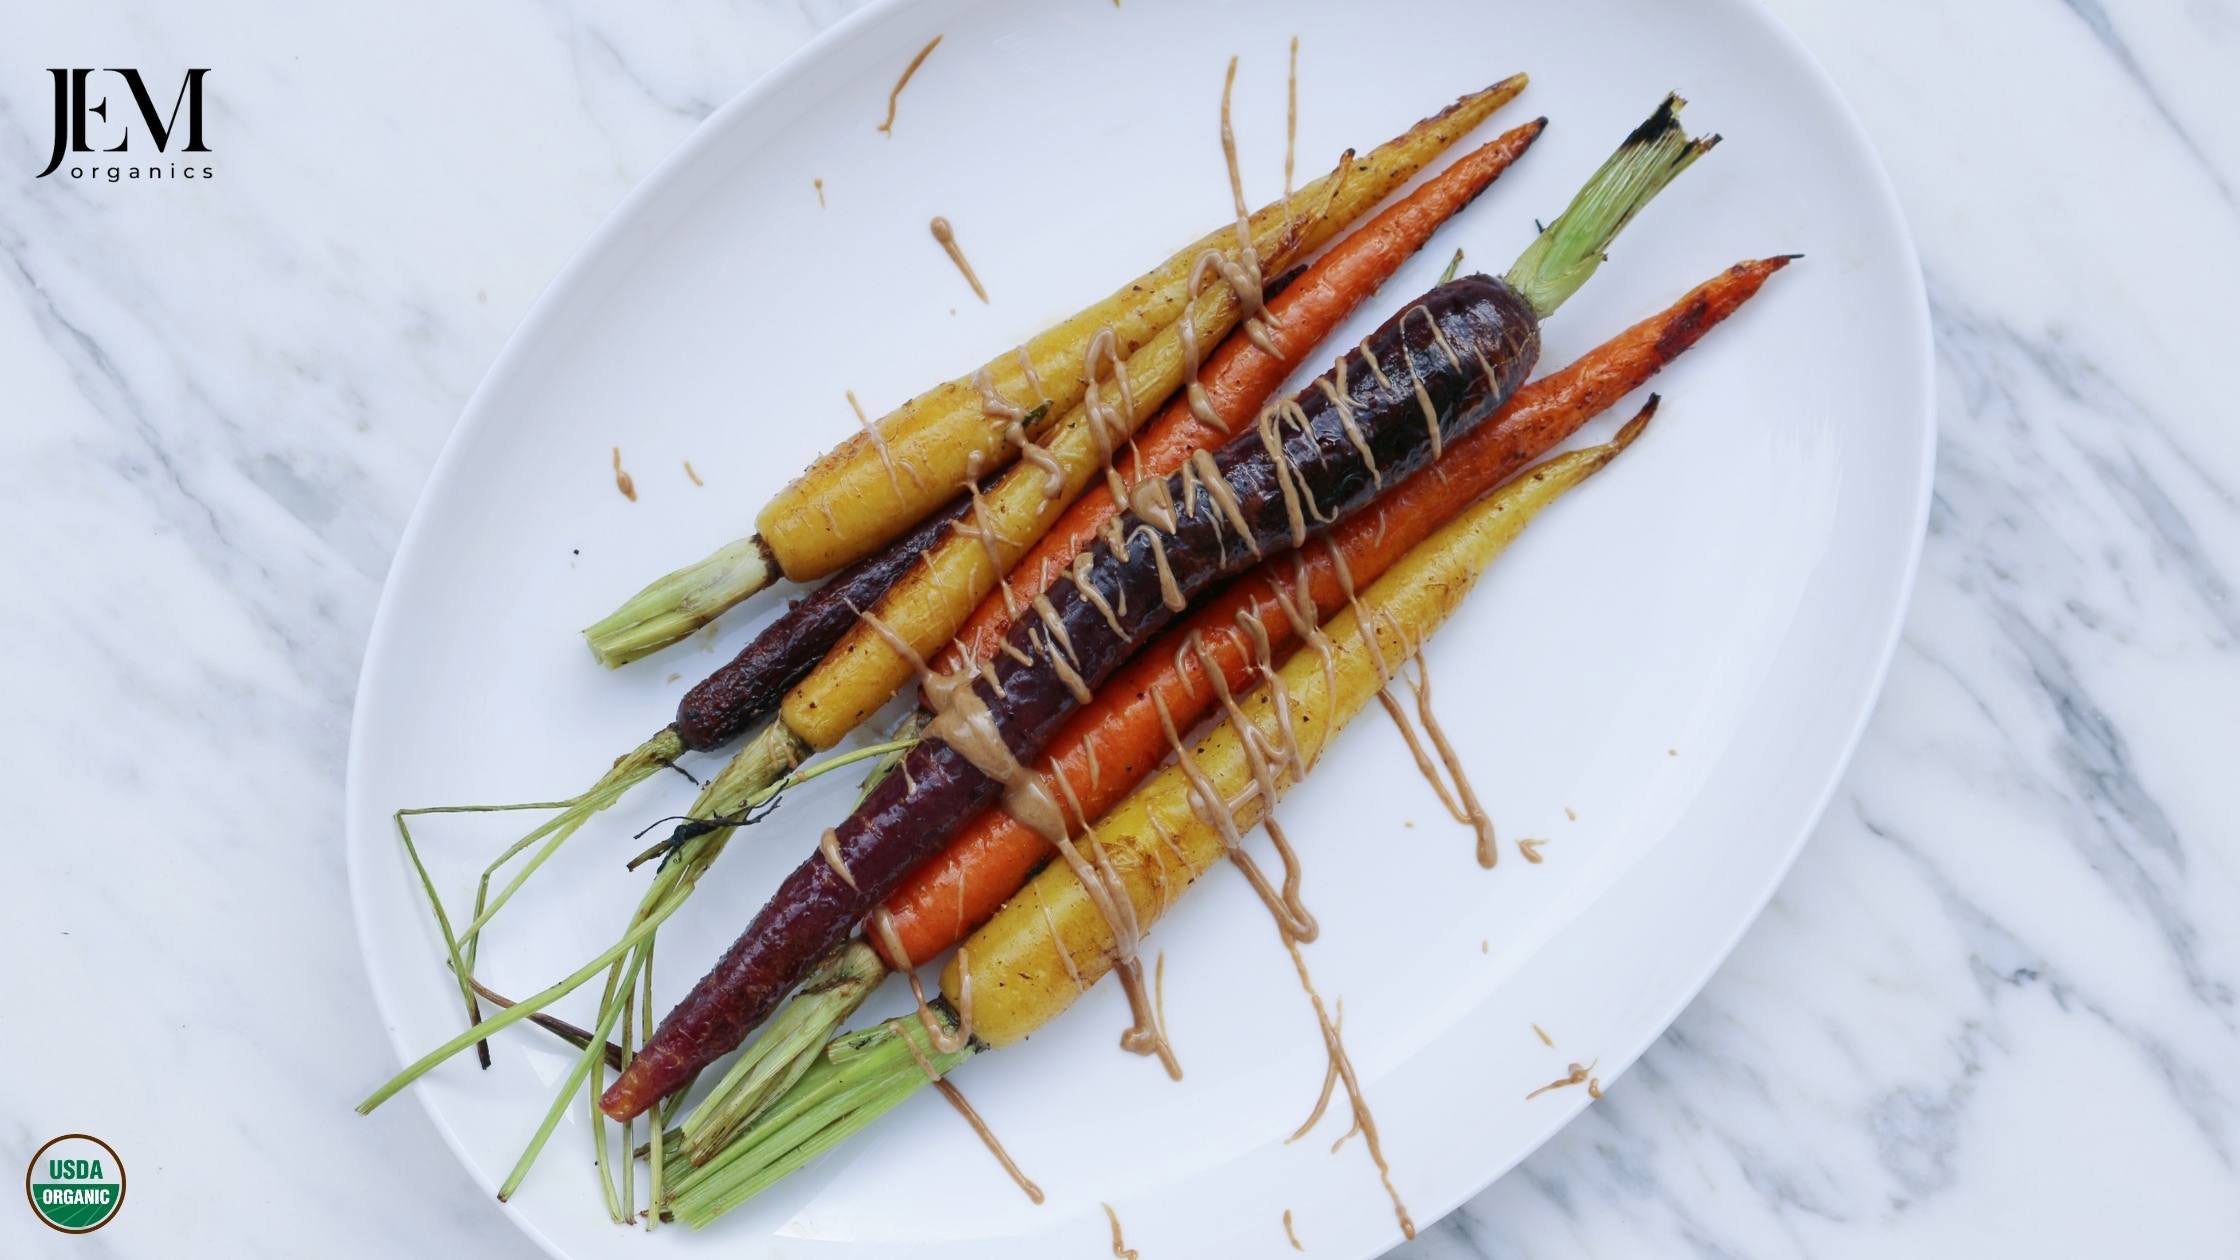 Roasted carrots on a white plate drizzled with JEM Organics almond butter